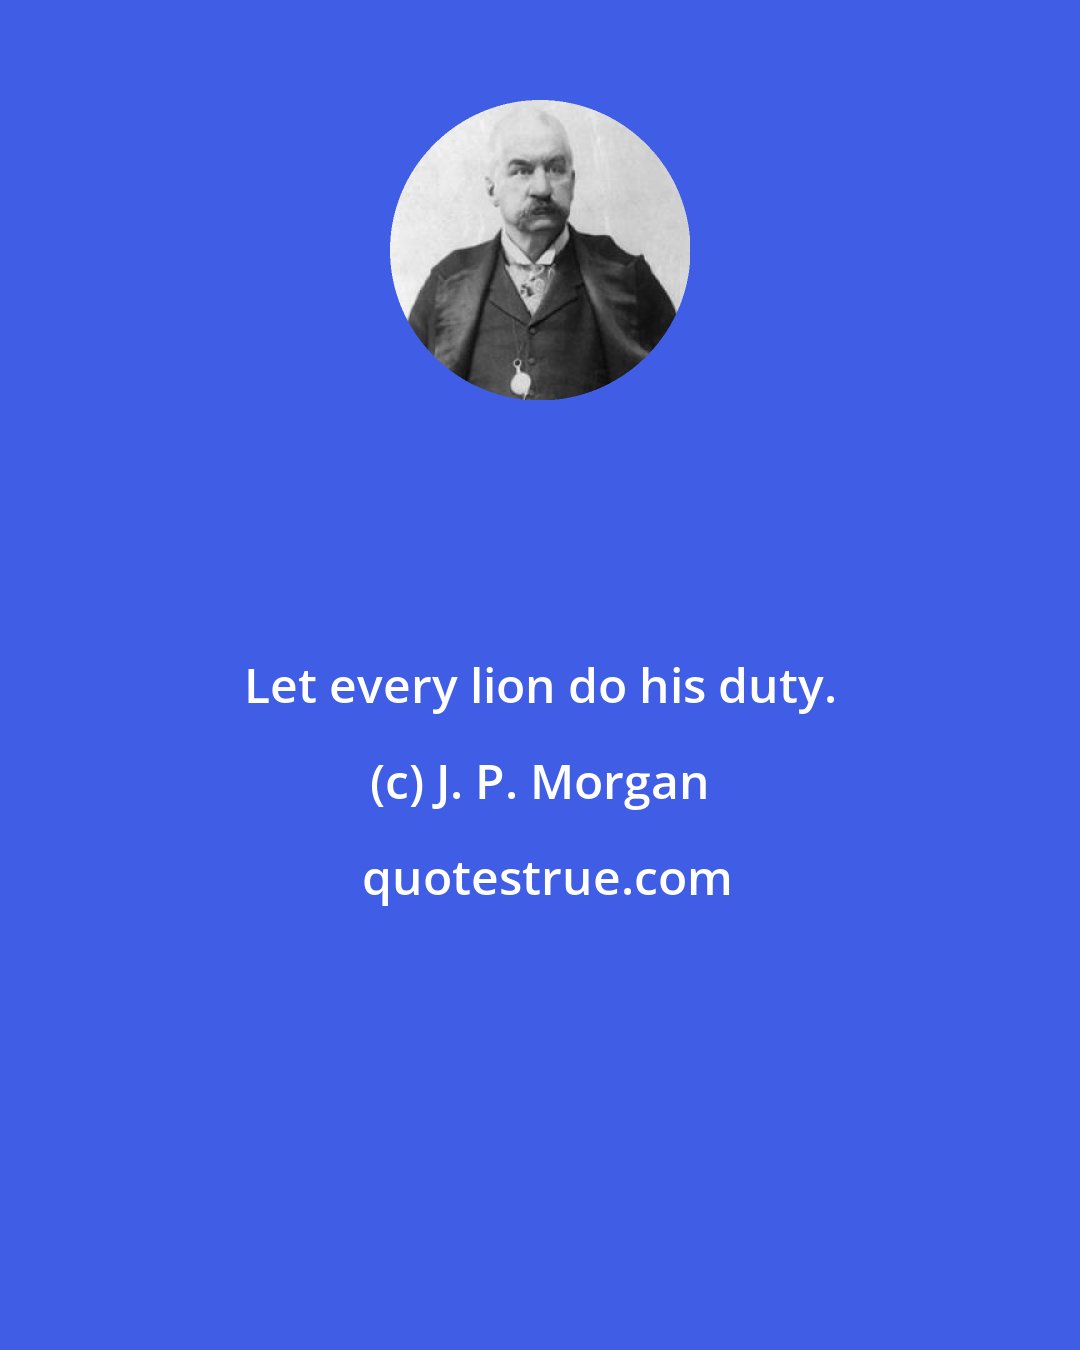 J. P. Morgan: Let every lion do his duty.